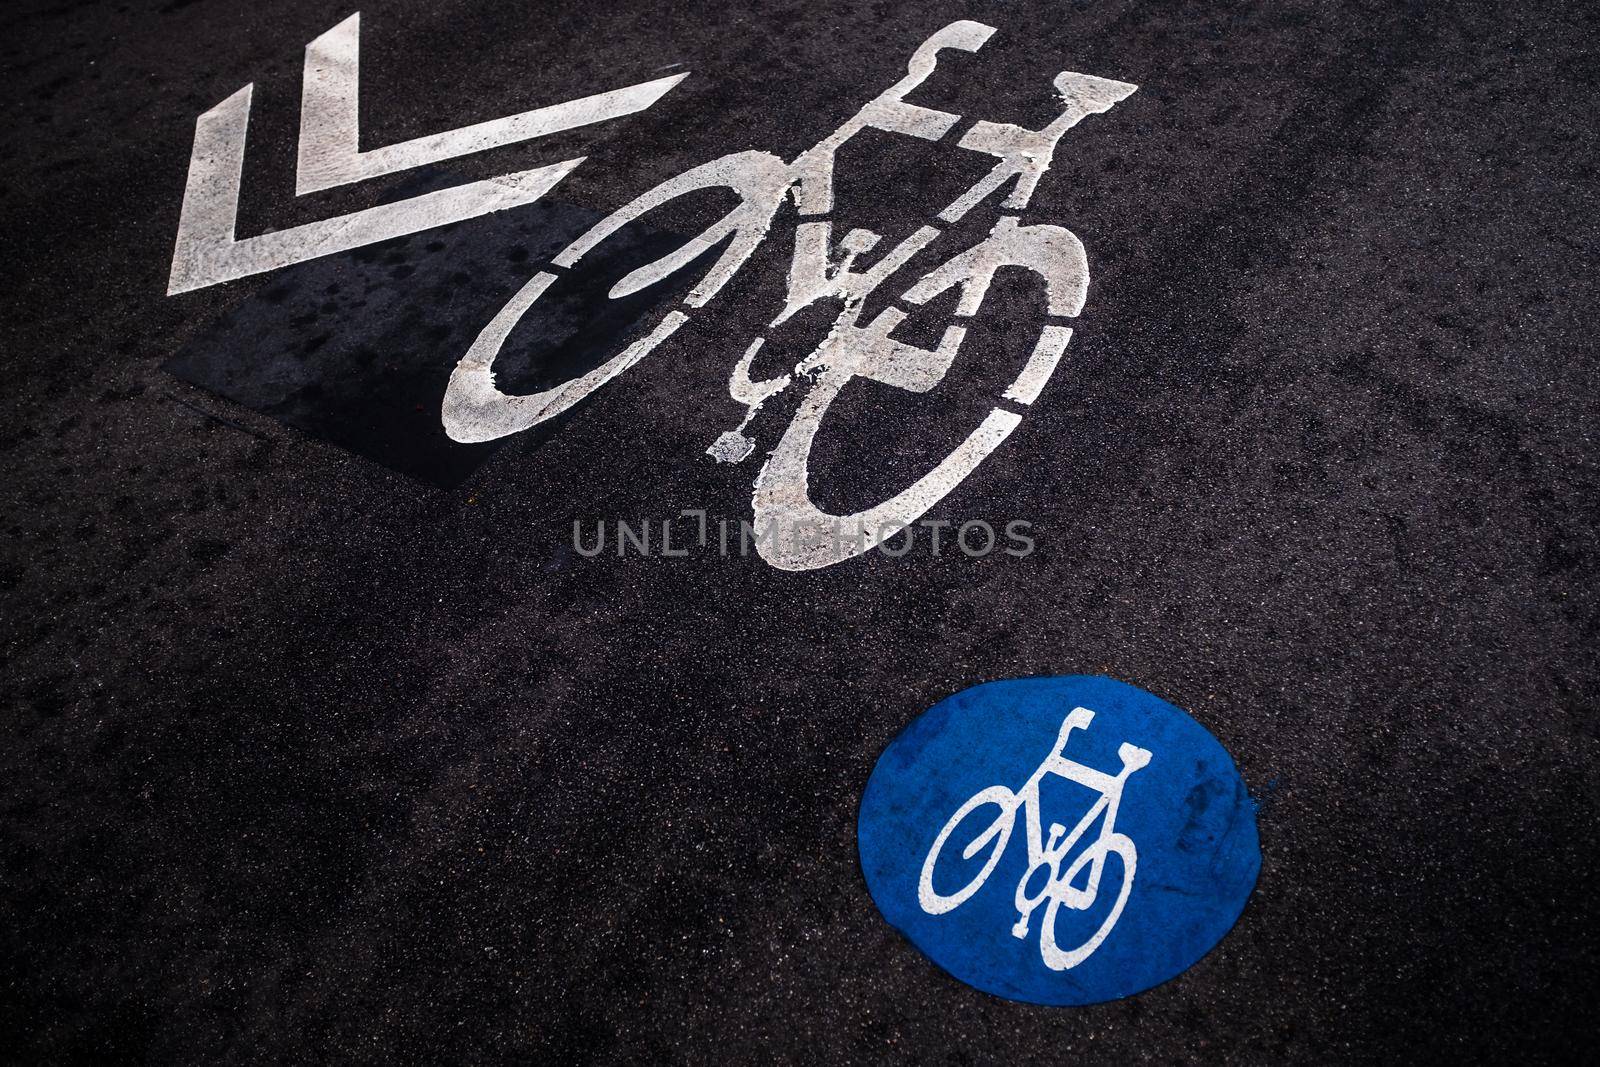 Cycle path markings on a black asphalt background viewed from high angle. Two different bike symbol and direction arrow. Road markings used in some areas in the city of Barcelona (Spain).